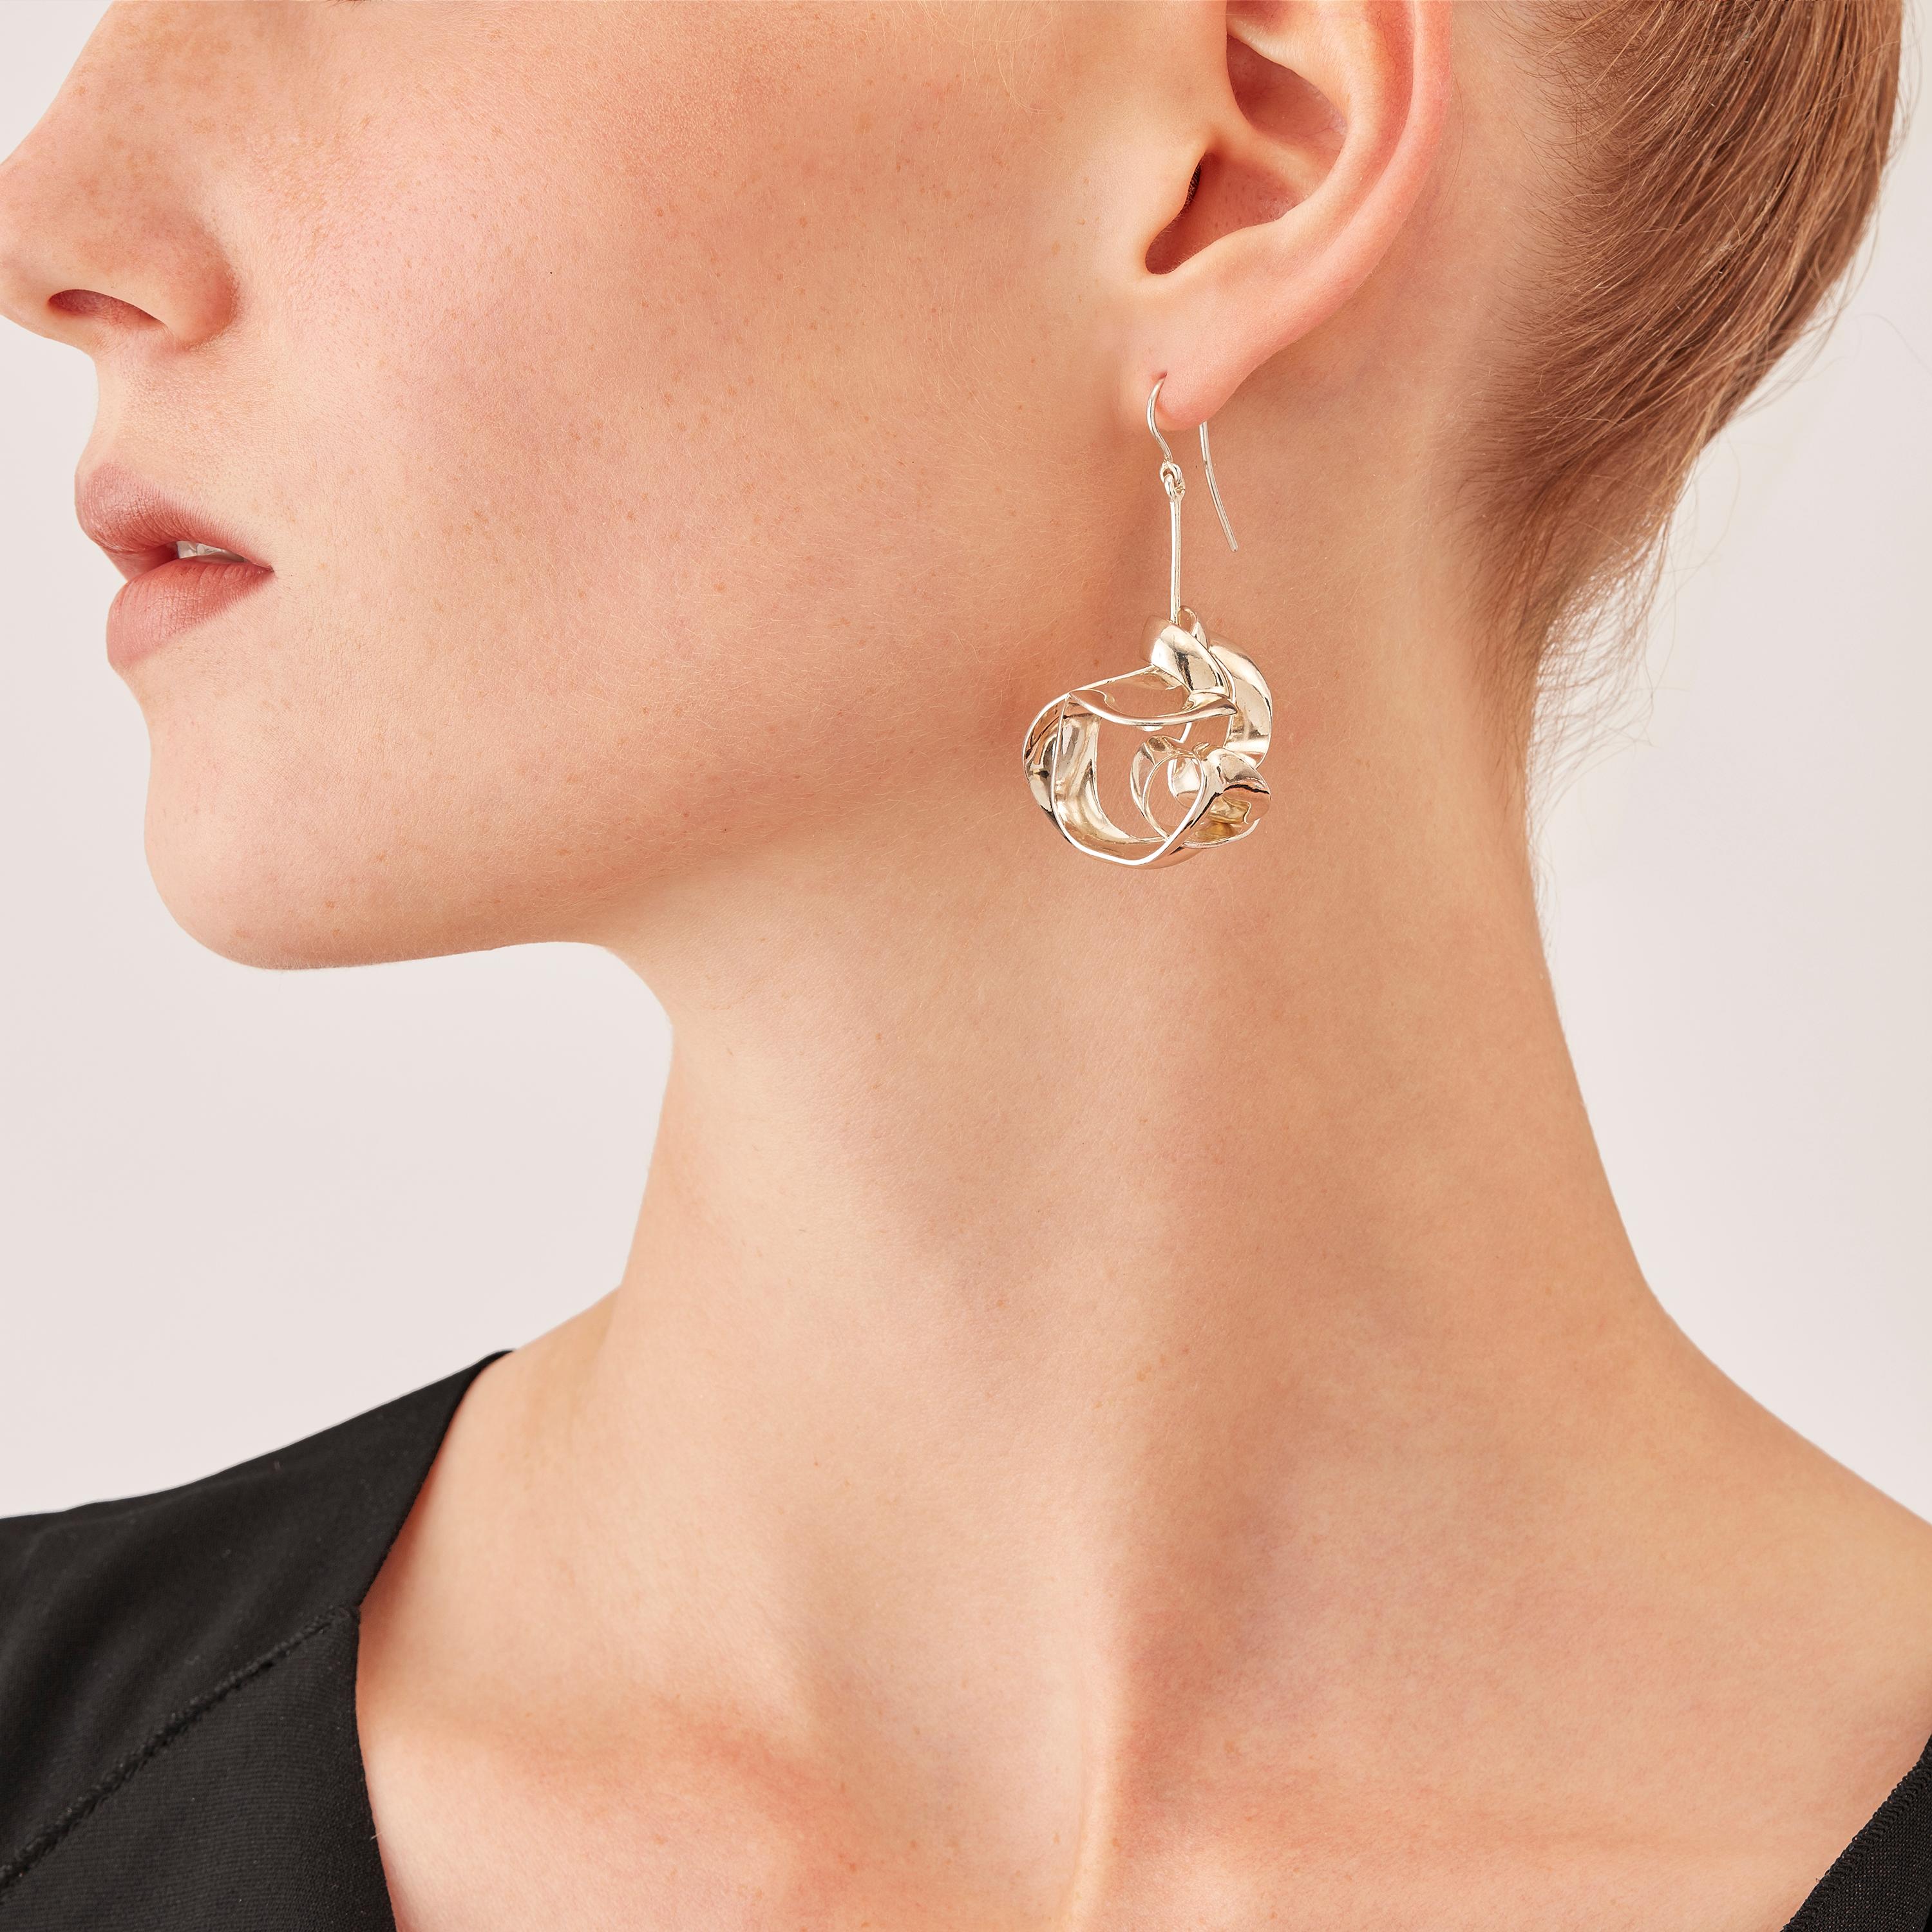 With their delicate, curved, free-form surfaces, the elements of these contemporary sculpture earrings fold and unfold with harmony and grace like shell fragments or metalized leaves. Intertwined cleverly, the sophisticated undulating sterling